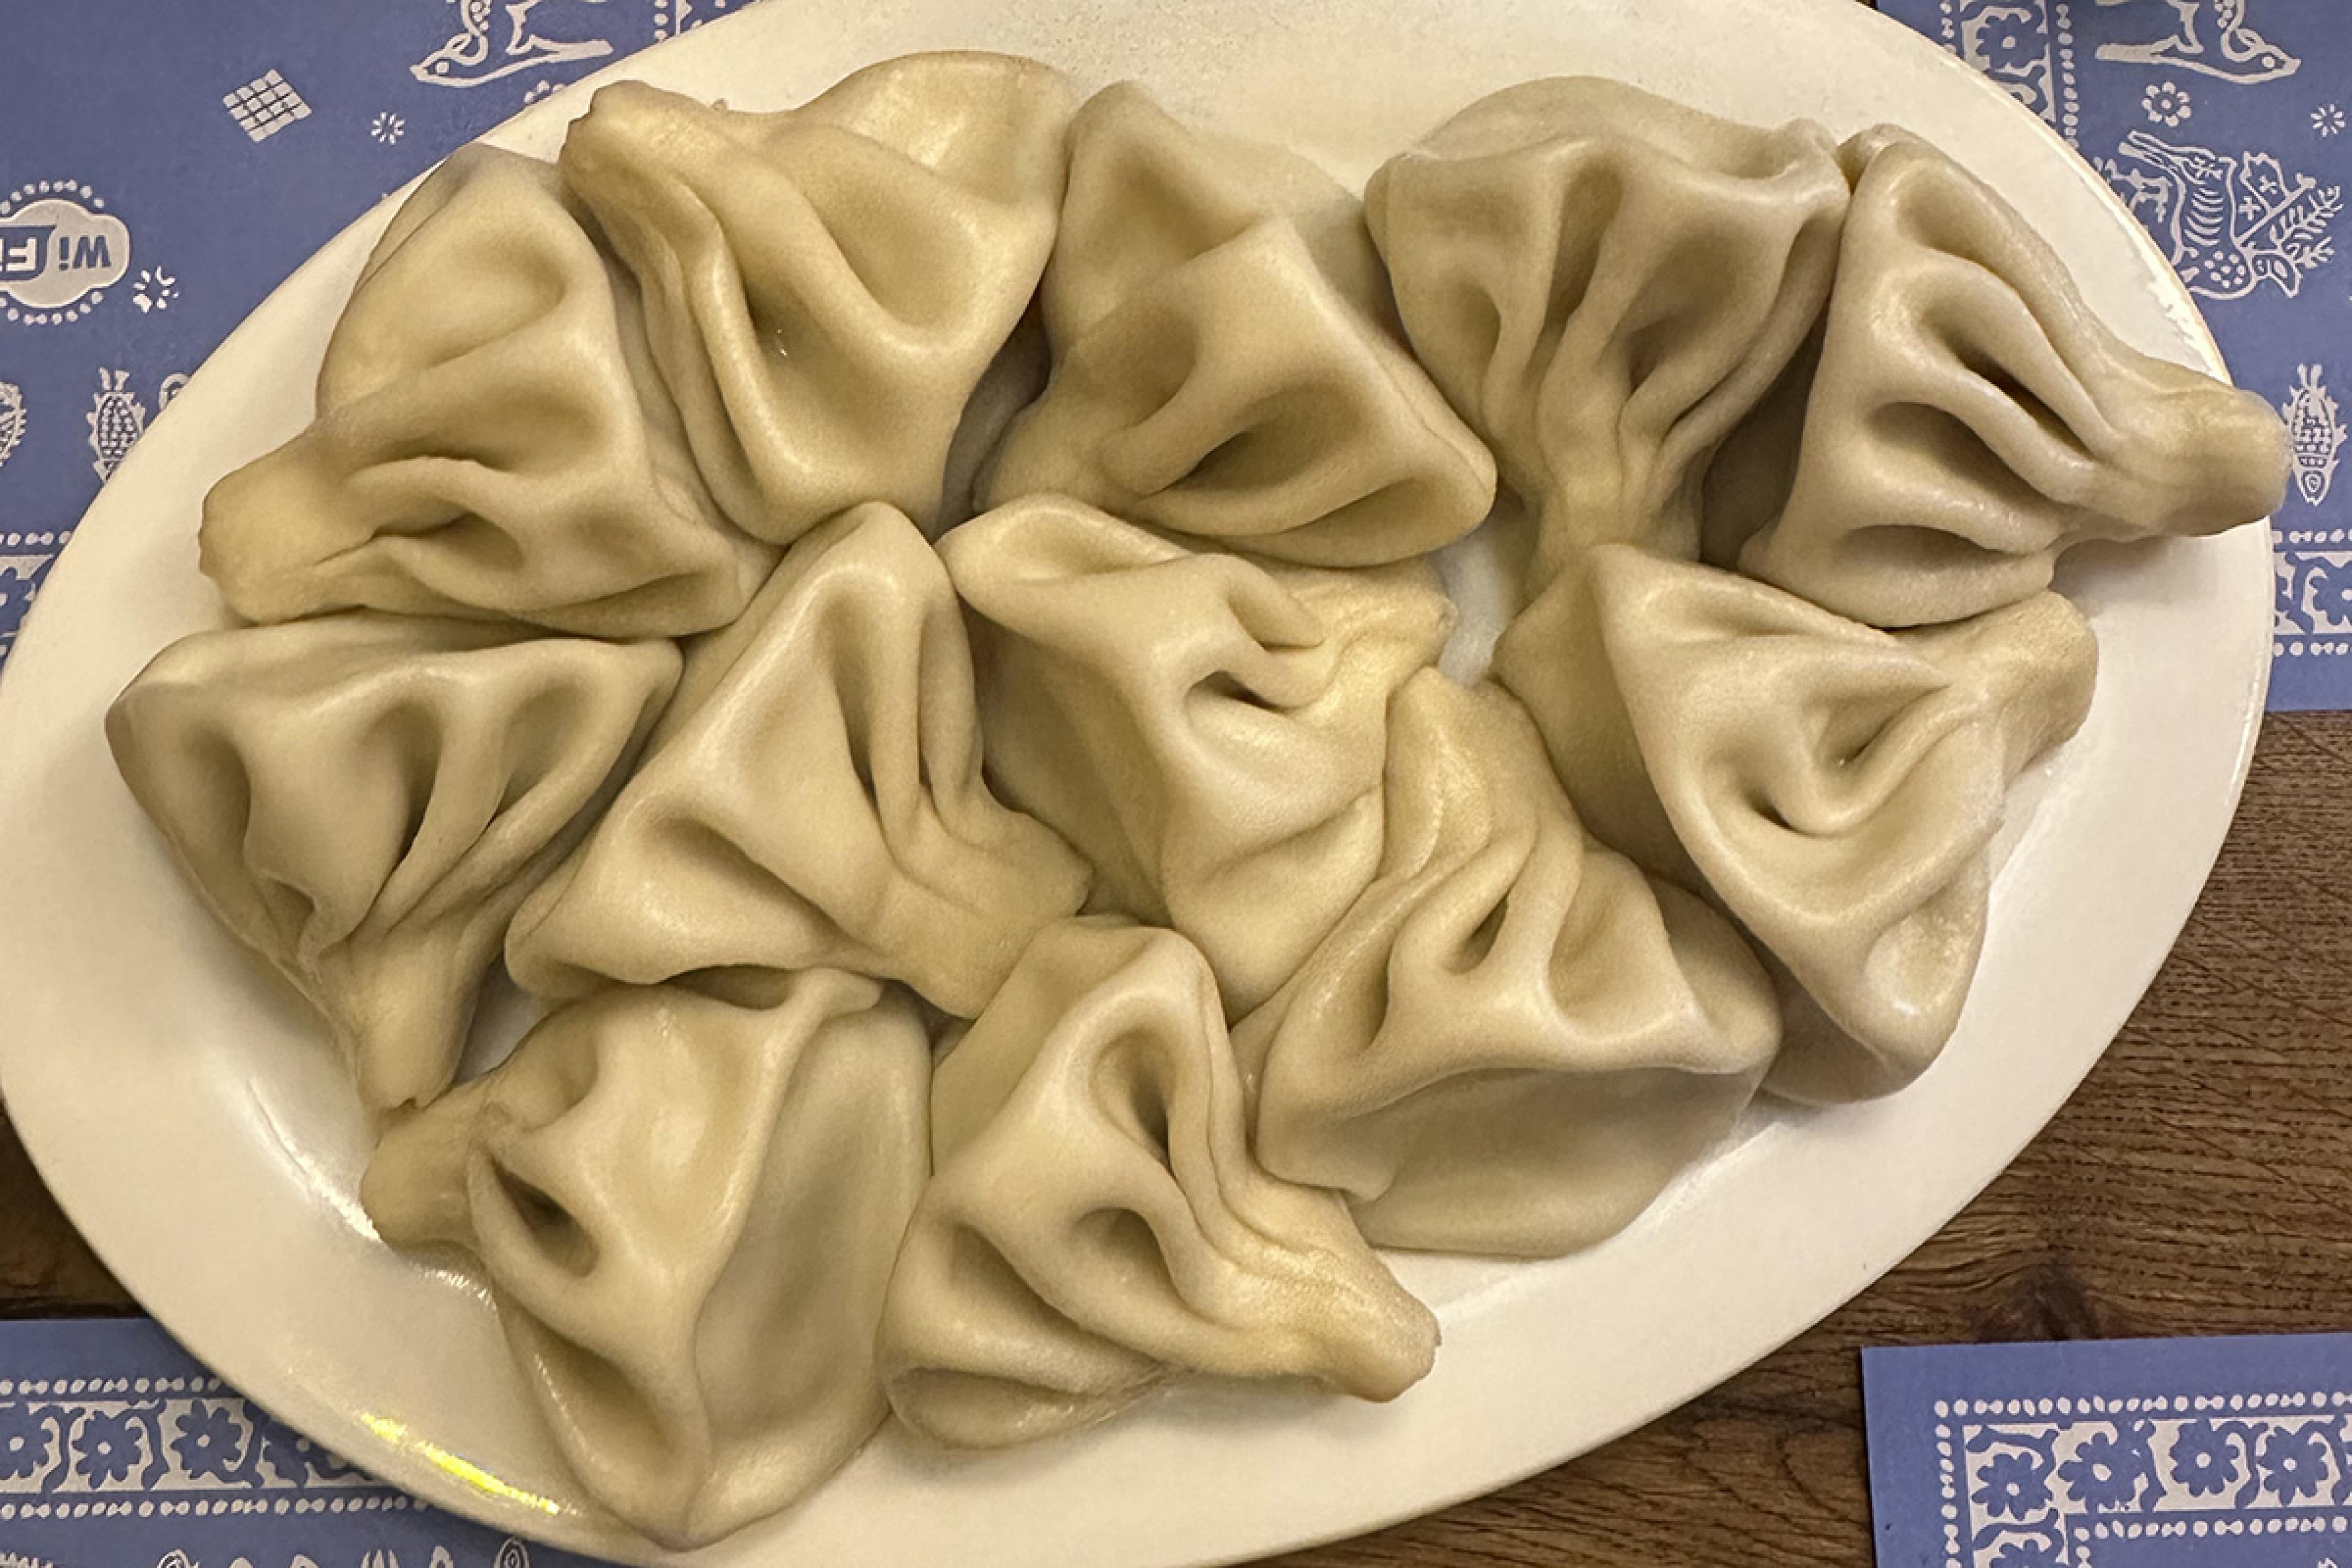 soup dumplings on a white plate with blue and white placemats on the table